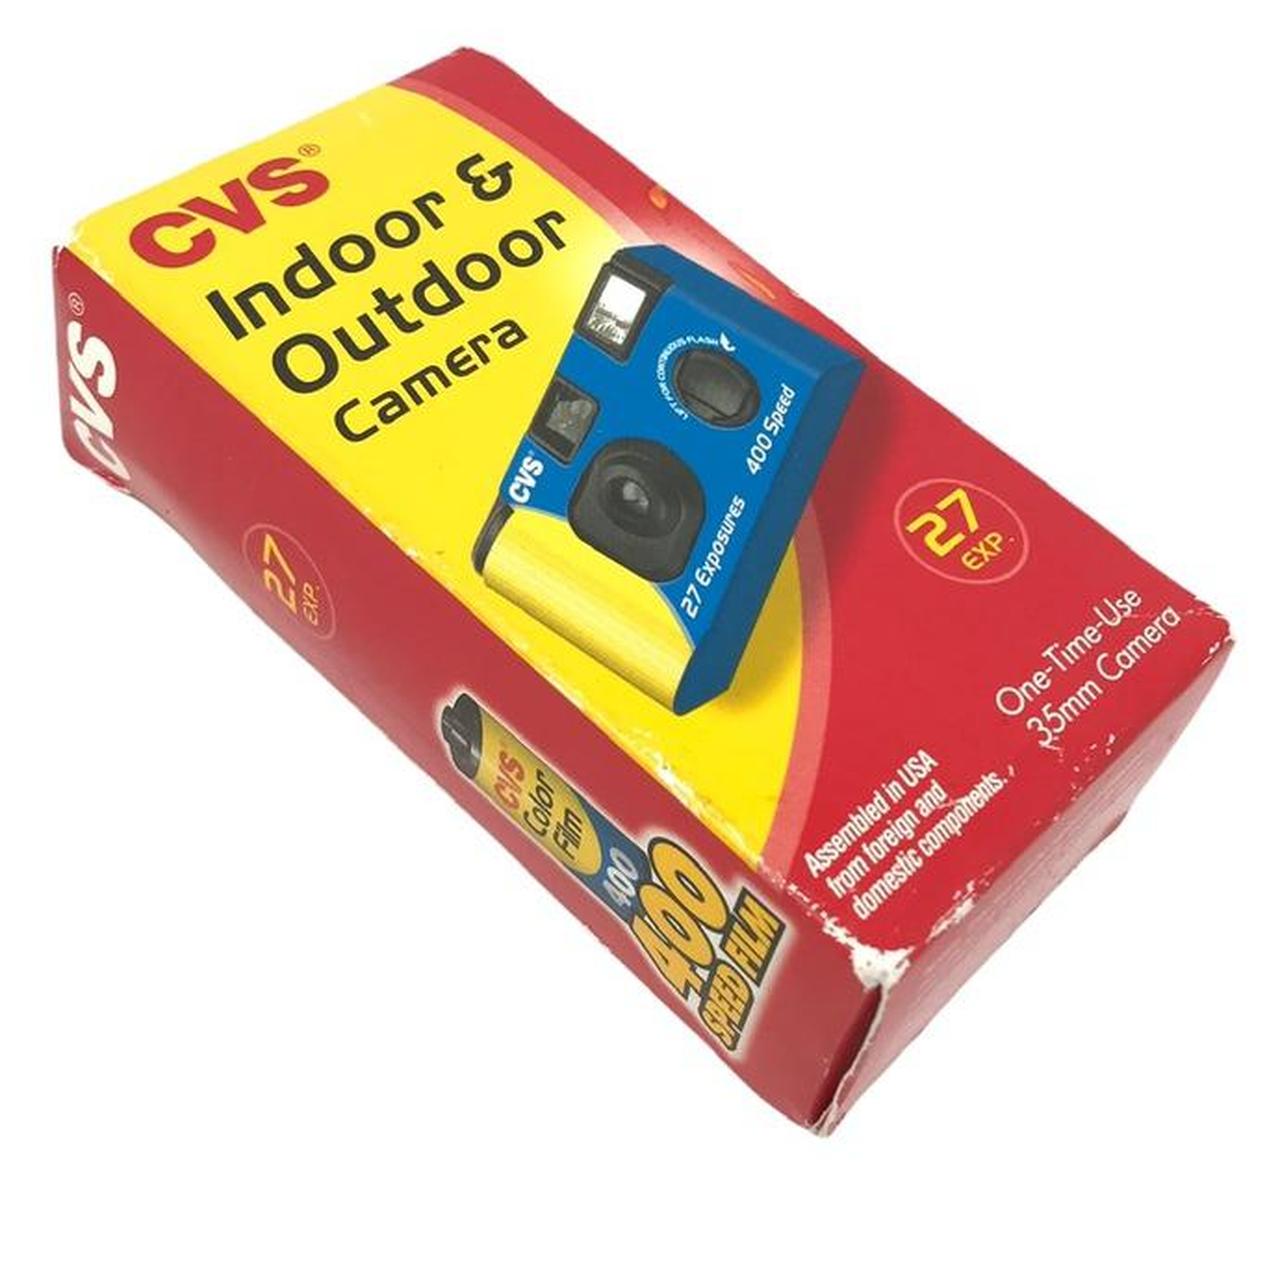 Product Image 2 - CVS brand 35mm Disposable Film